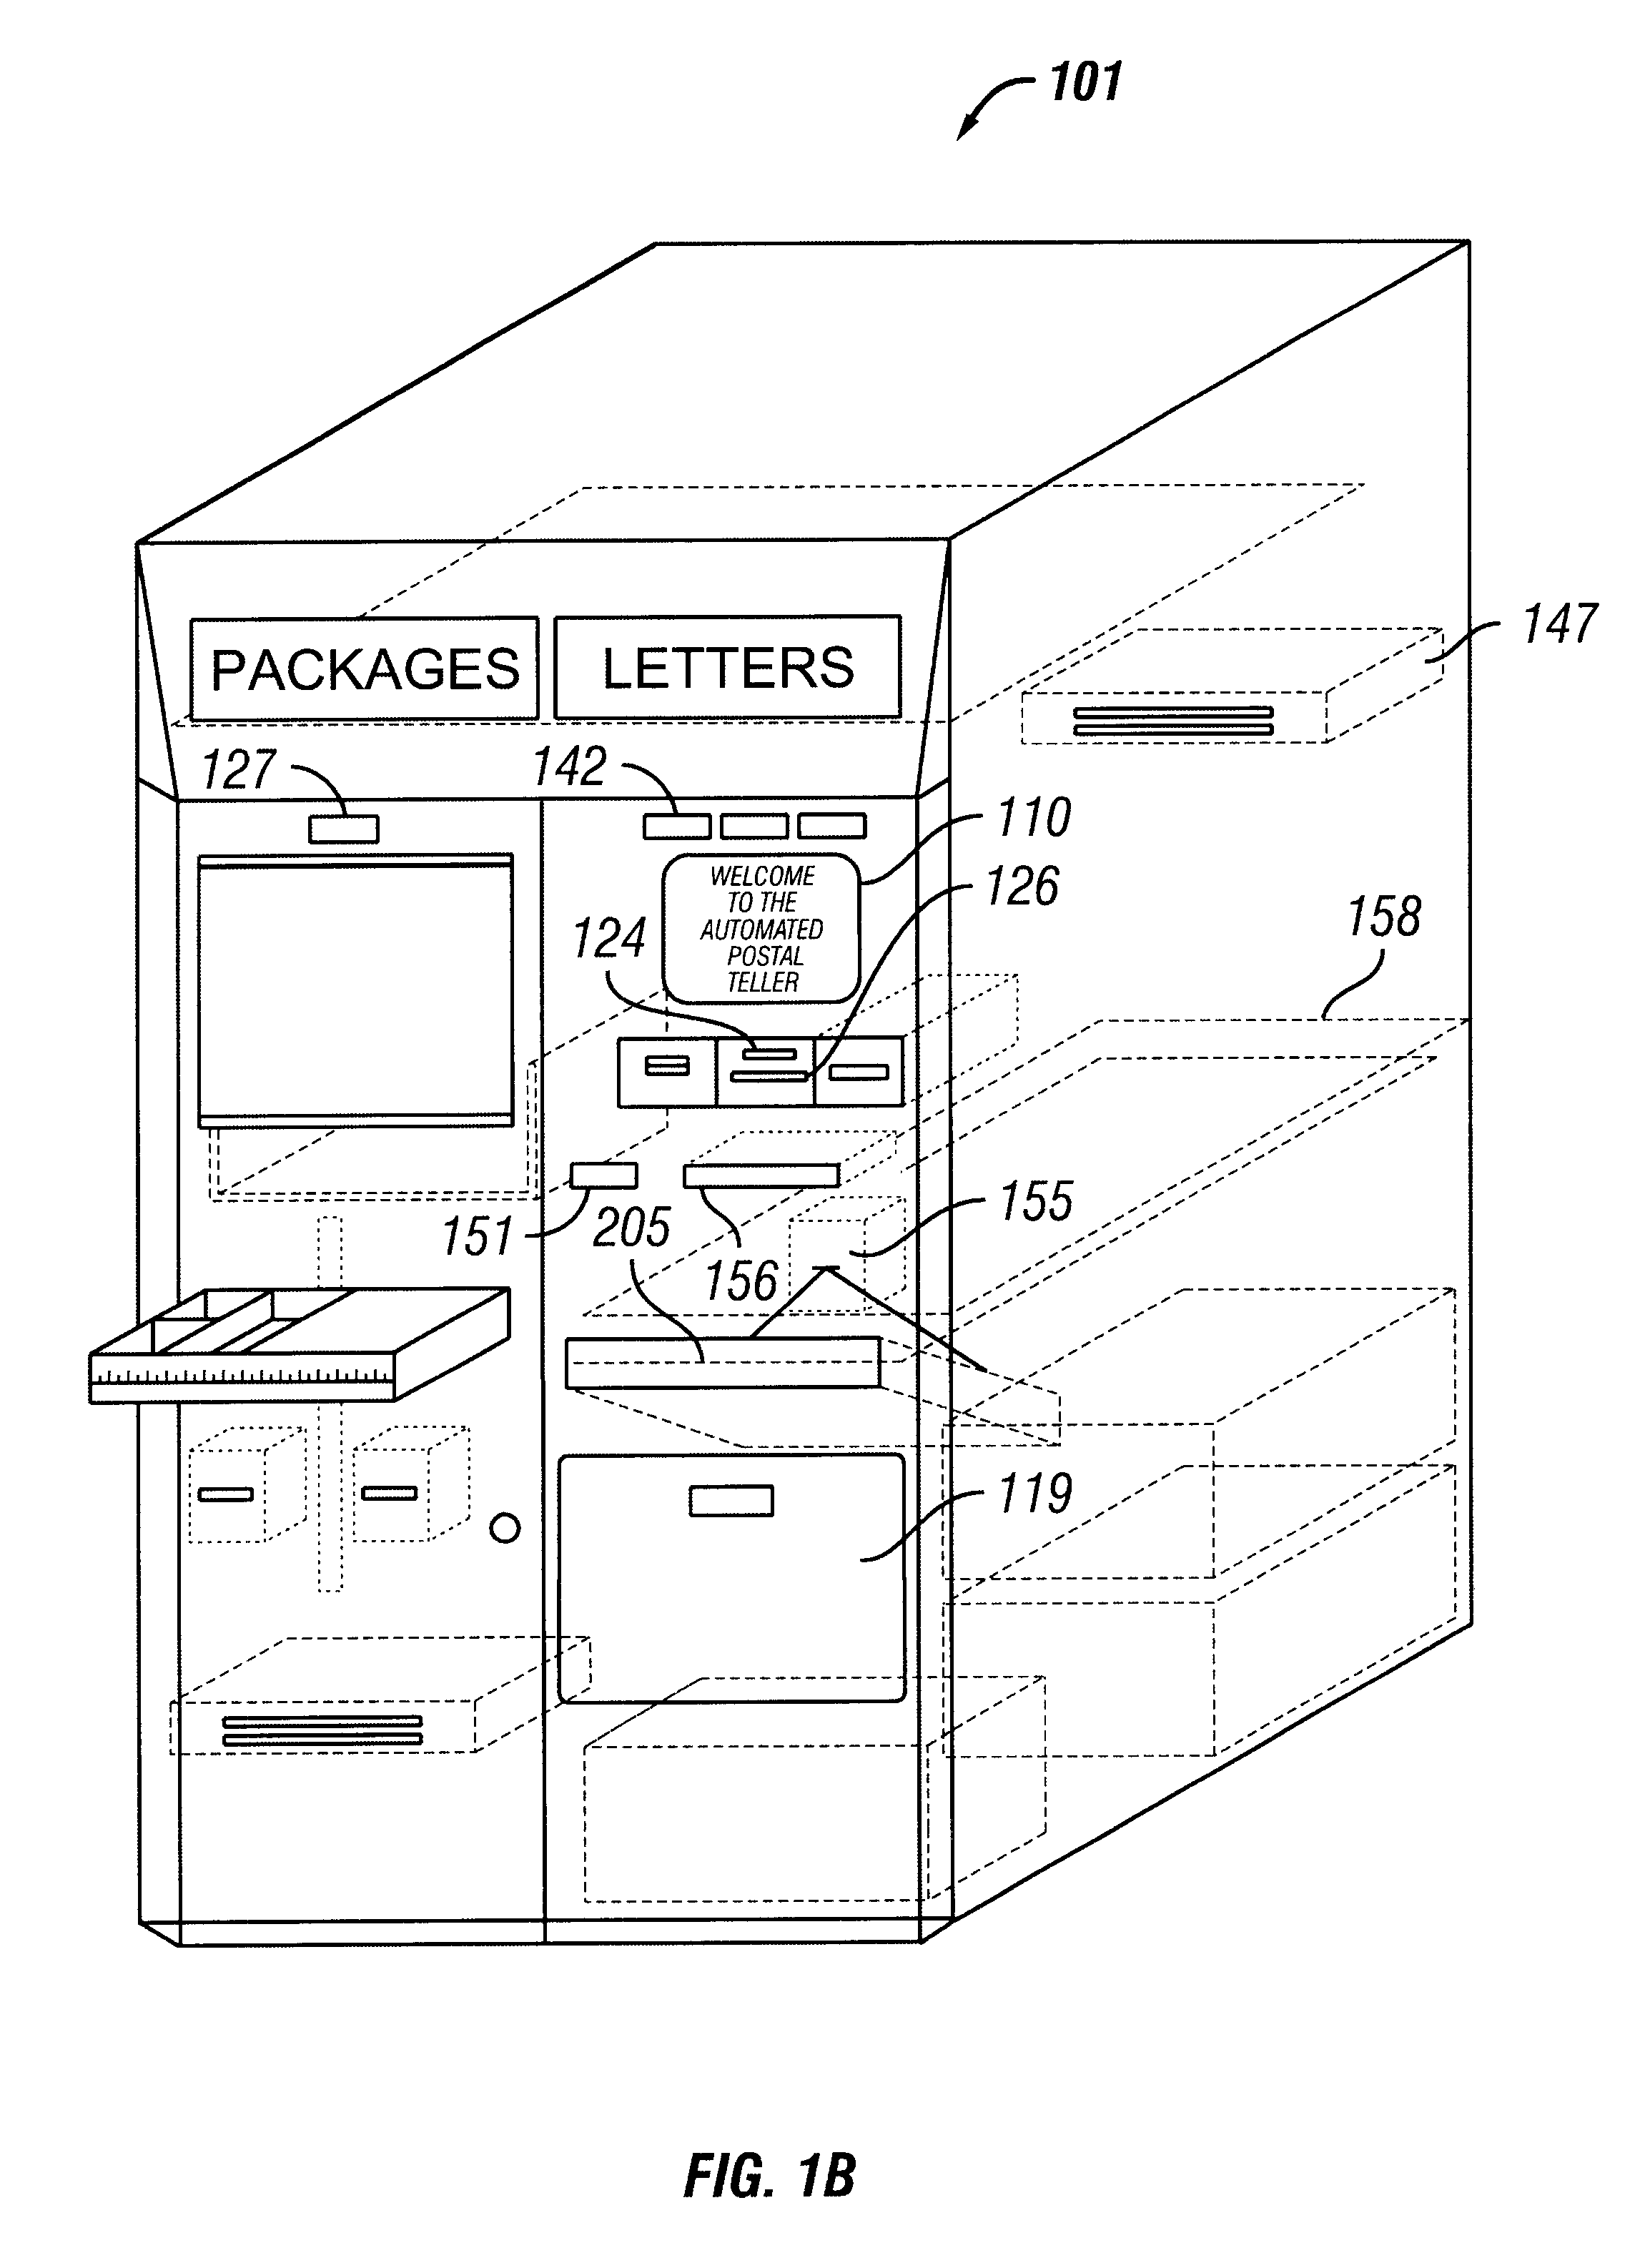 Automated self-service mail processing and storing systems